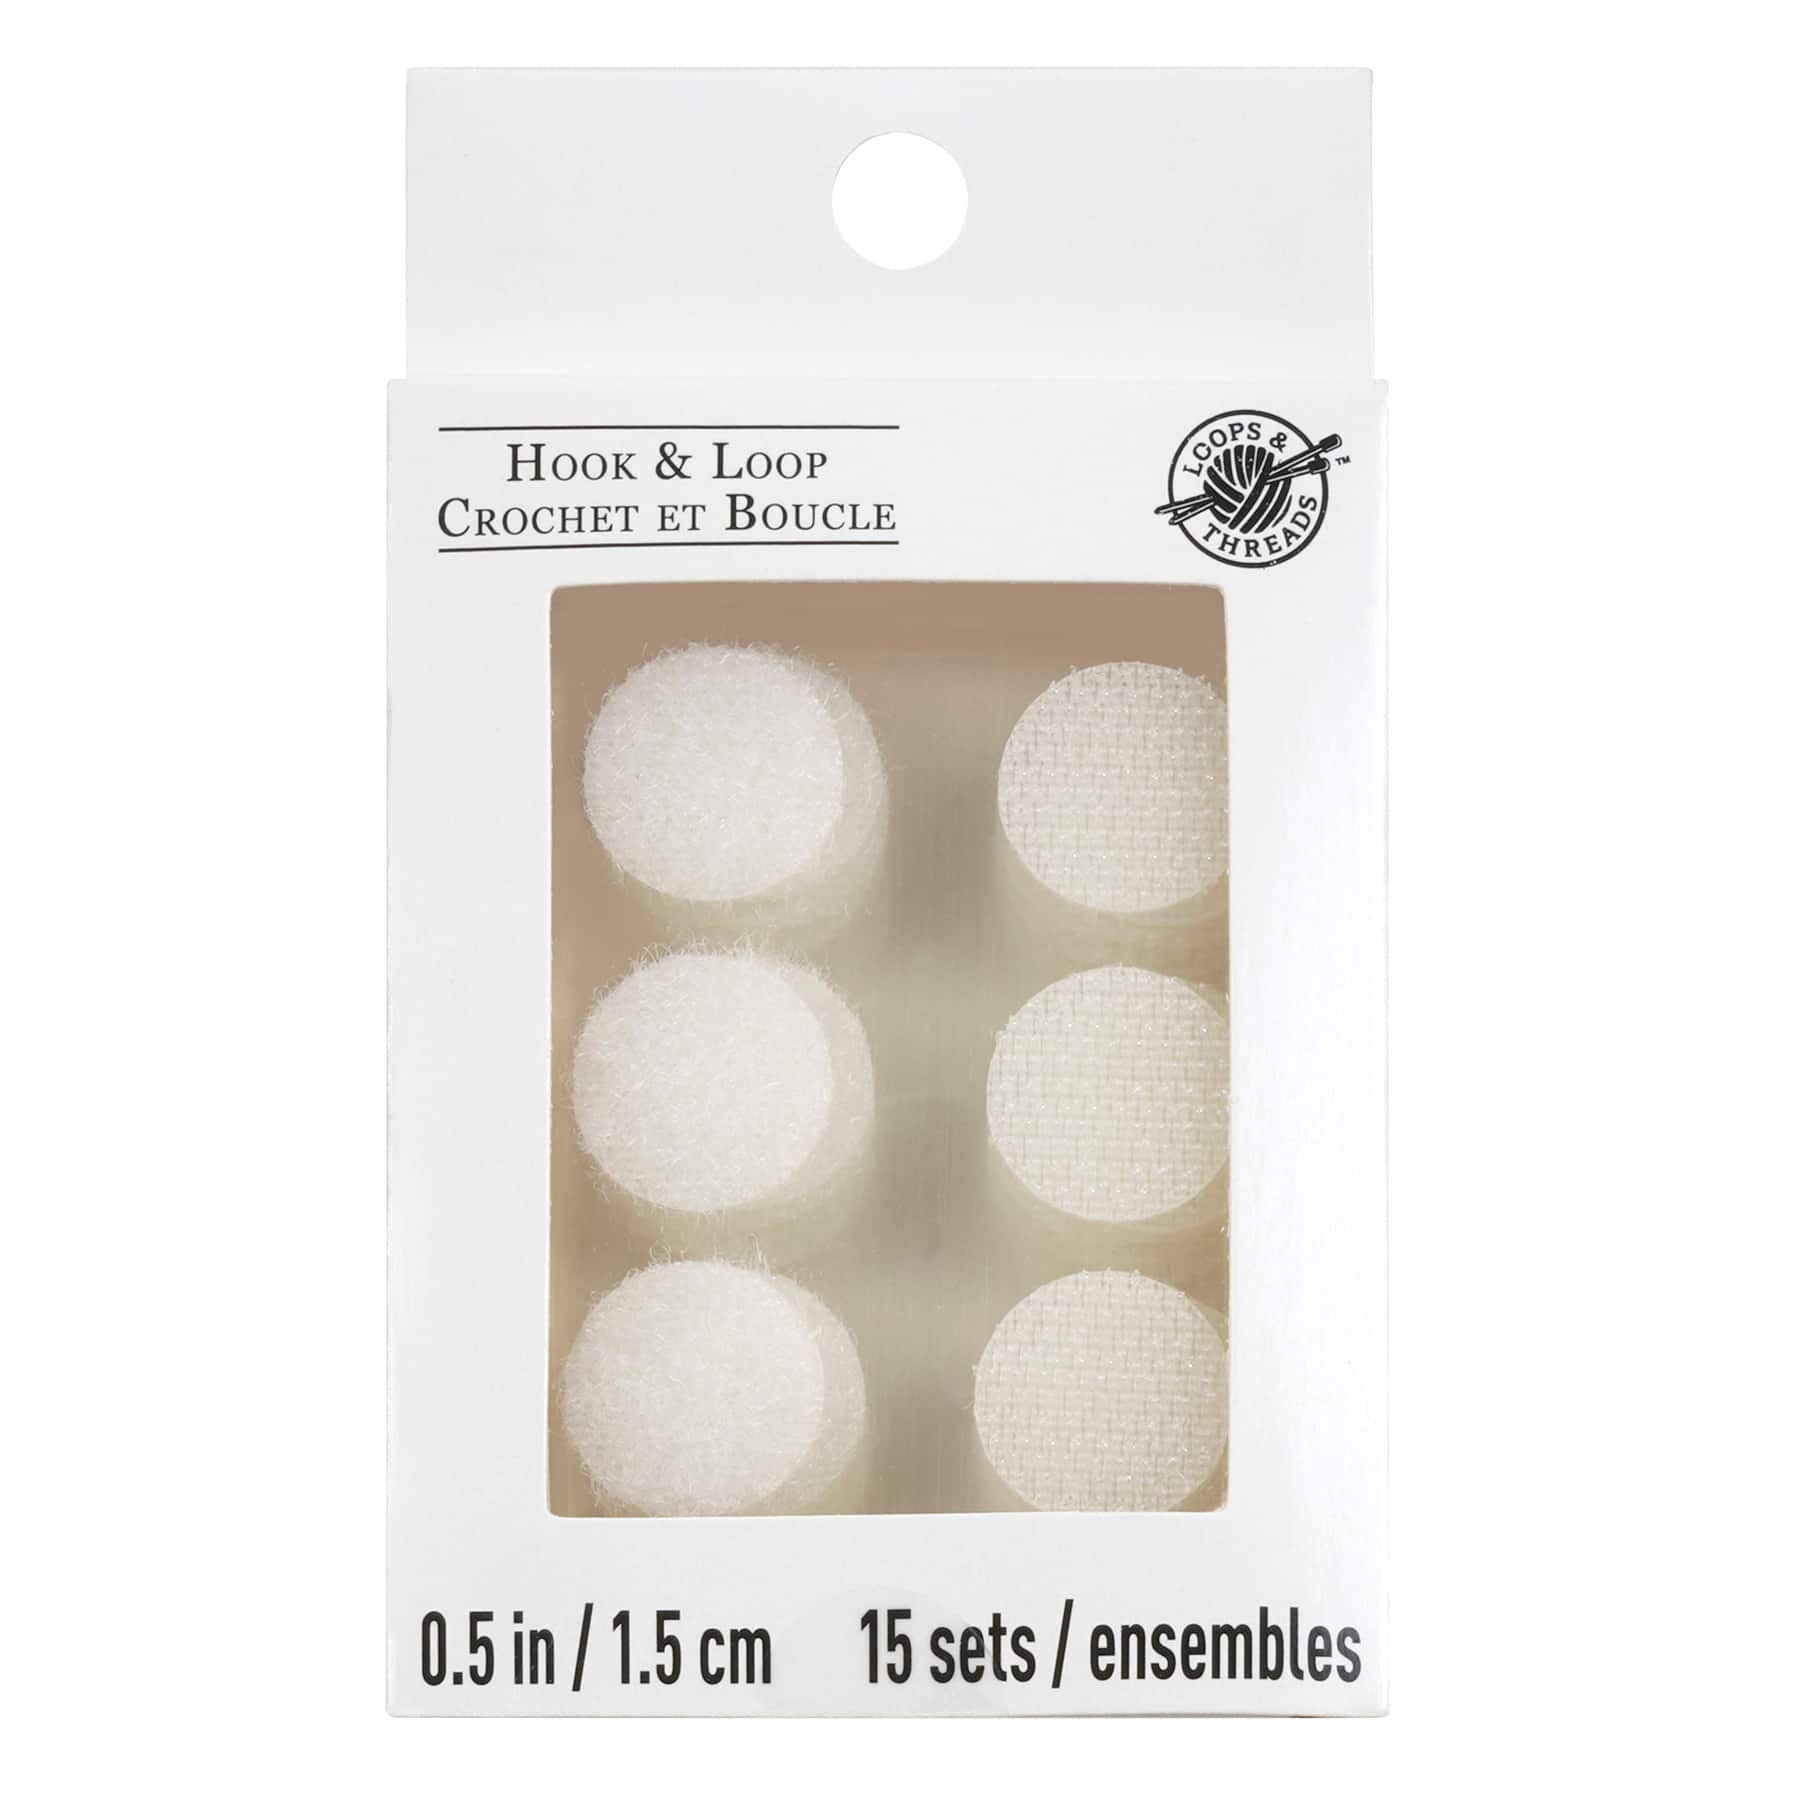 VELCRO Brand Adhesive Dots Black | 500 Pk 3/4 Circles Sticky Back Round  Hook and Loop for Office Organization, Arts and Crafts, School Projects